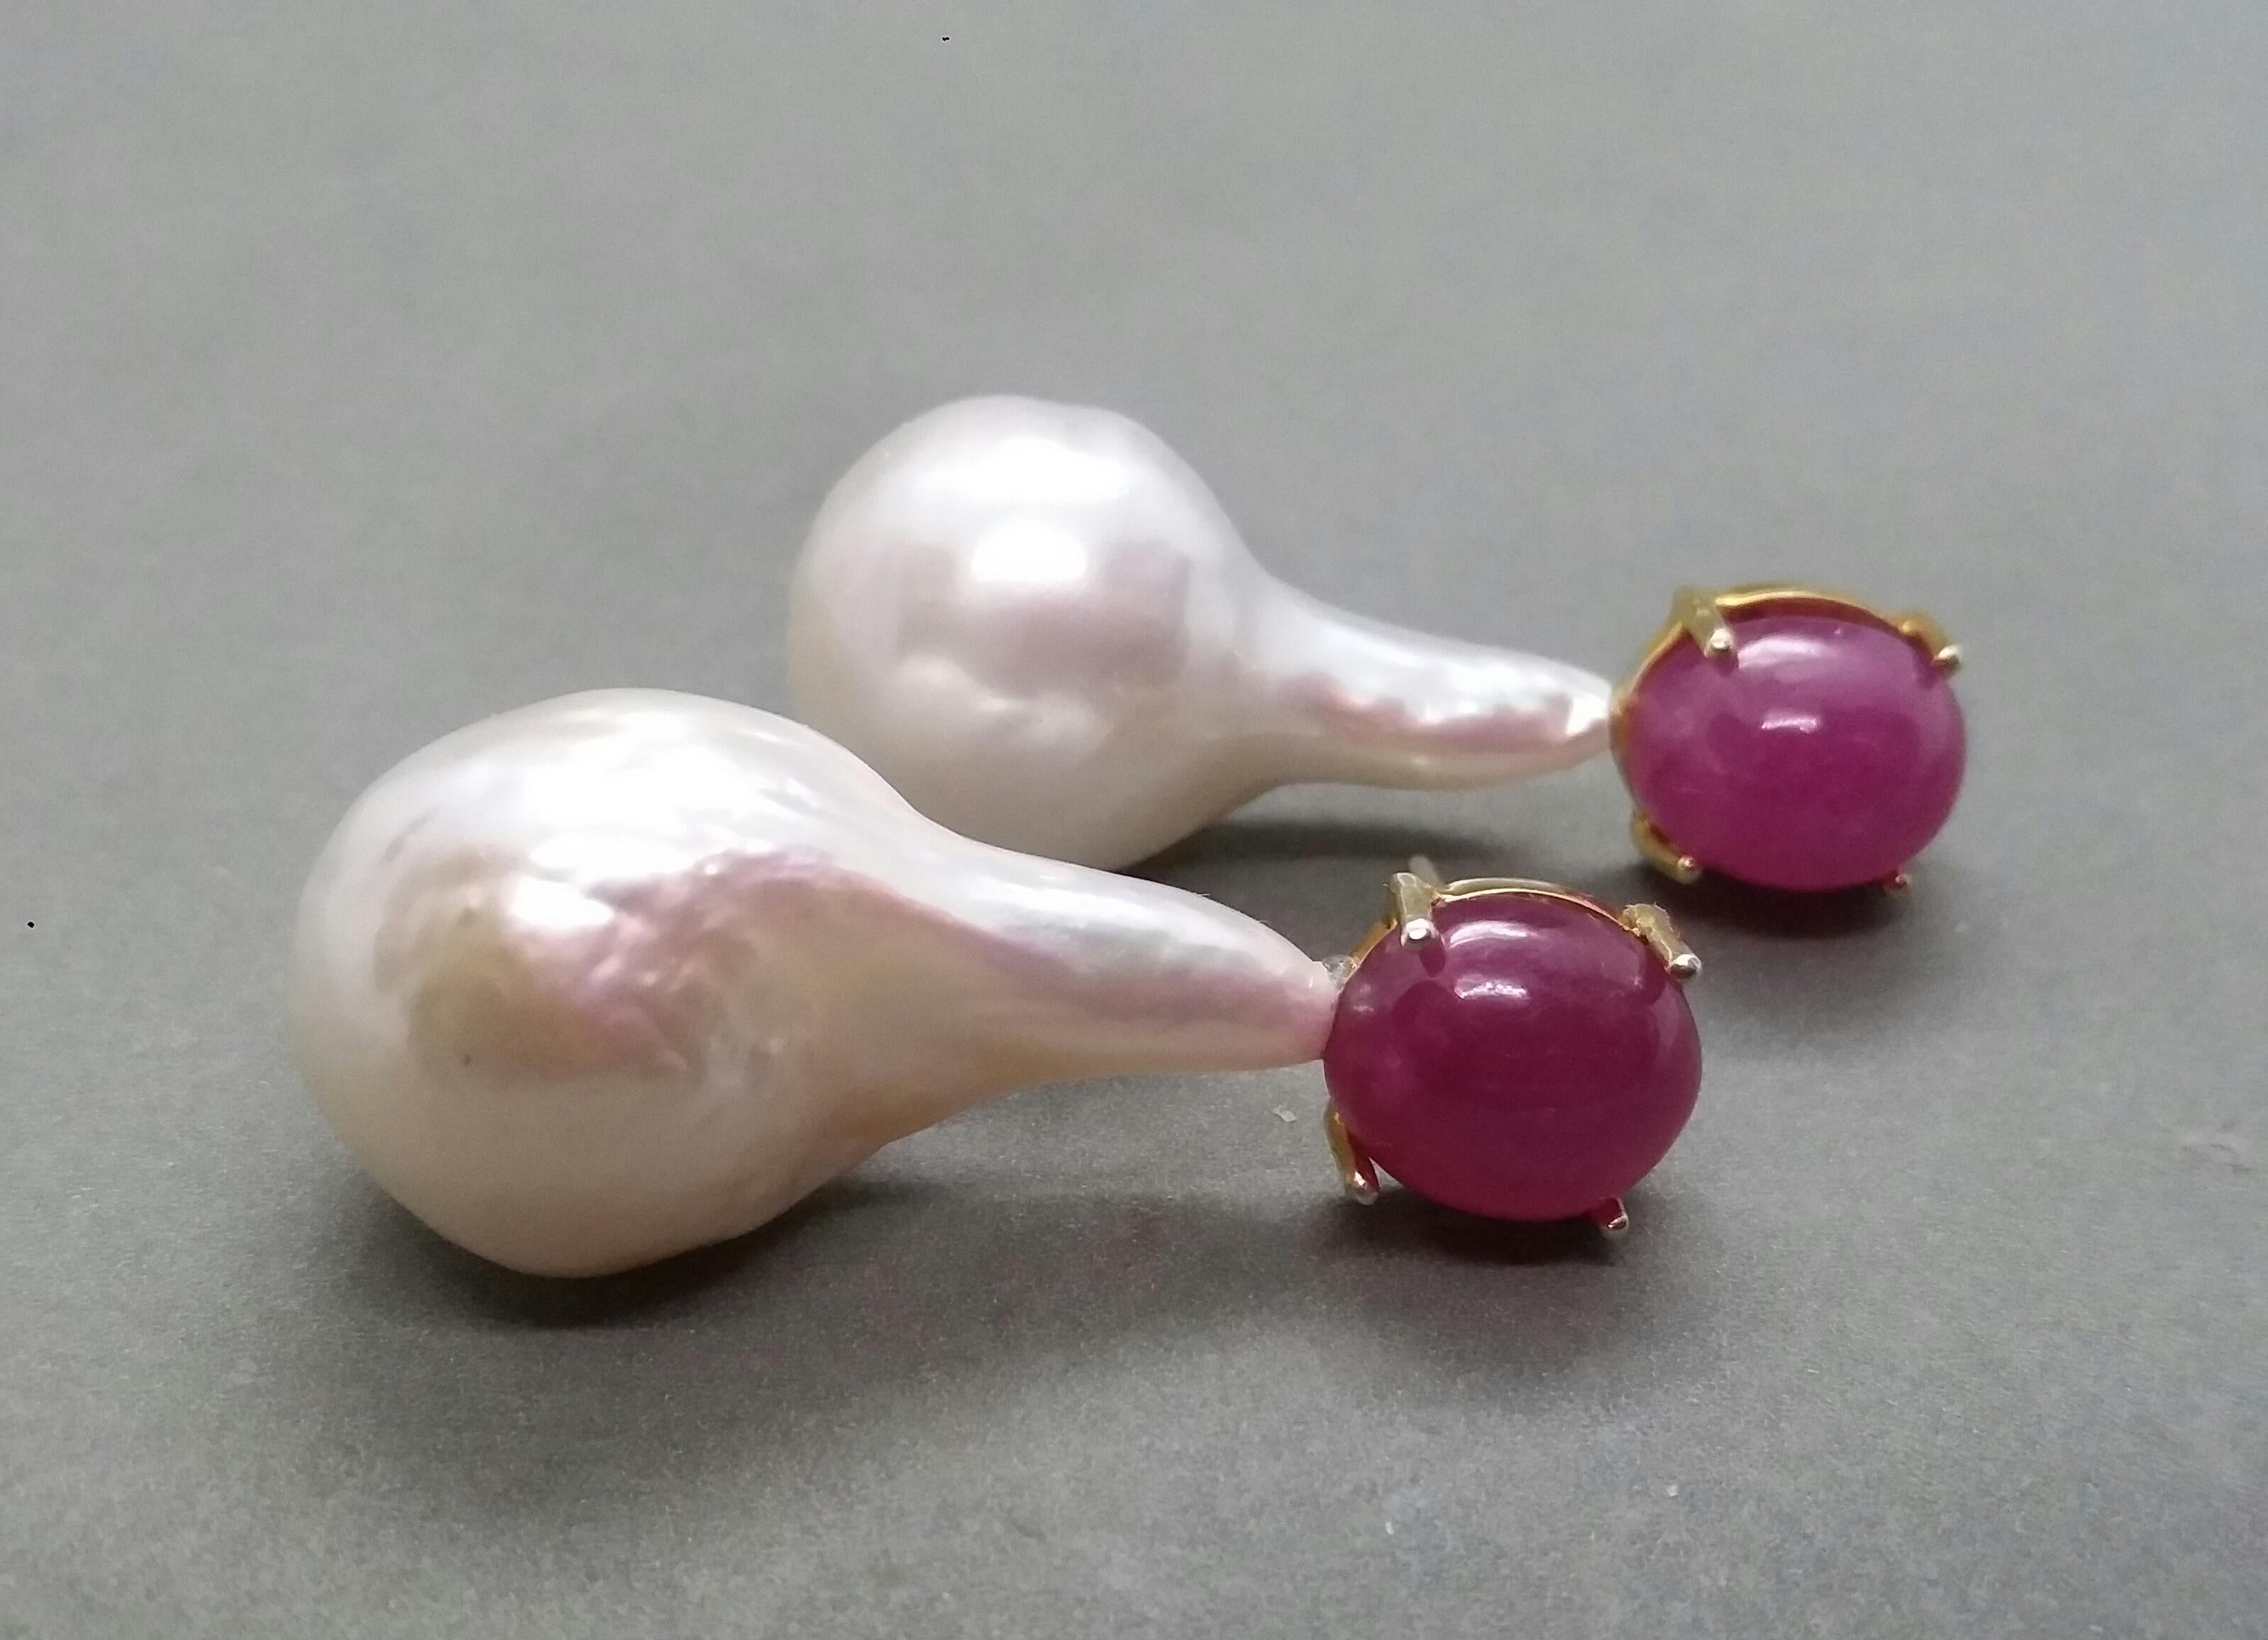 Big Size Pear Shape Baroque Pearls Oval Ruby Cabochon 14 Karat Gold Earrings In Good Condition For Sale In Bangkok, TH